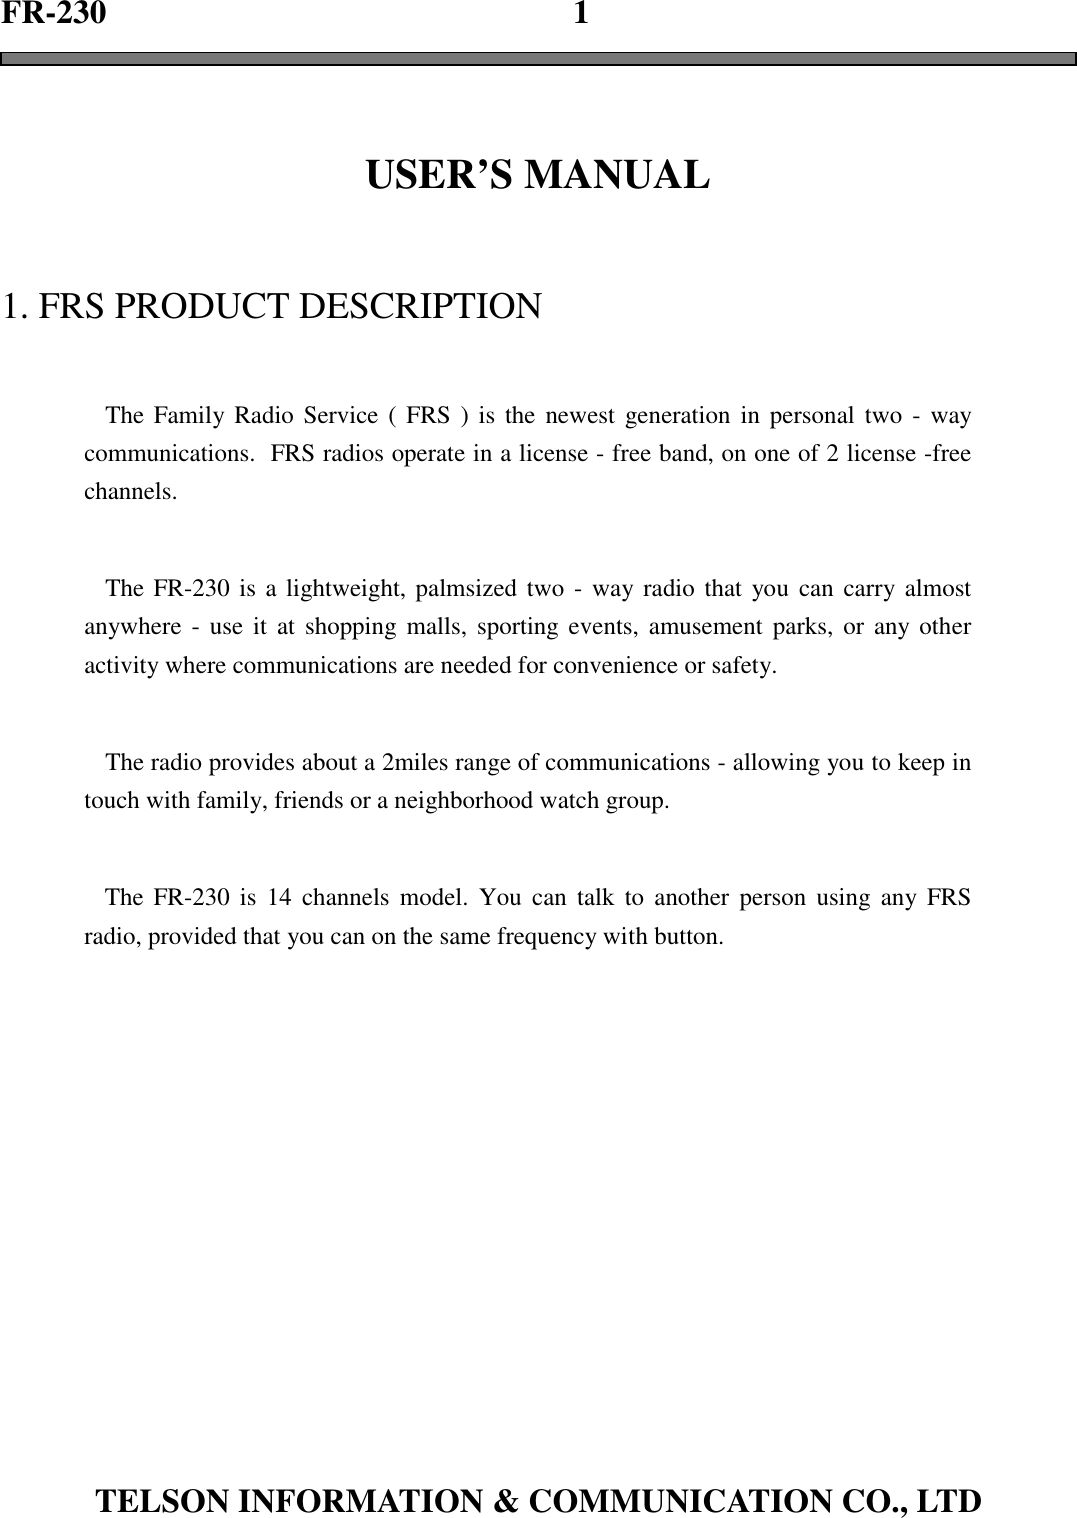 FR-230                                                        1TELSON INFORMATION &amp; COMMUNICATION CO., LTDUSER’S MANUAL1. FRS PRODUCT DESCRIPTIONThe Family Radio Service ( FRS ) is the newest generation in personal two - waycommunications.  FRS radios operate in a license - free band, on one of 2 license -freechannels.The FR-230 is a lightweight, palmsized two - way radio that you can carry almostanywhere - use it at shopping malls, sporting events, amusement parks, or any otheractivity where communications are needed for convenience or safety.The radio provides about a 2miles range of communications - allowing you to keep intouch with family, friends or a neighborhood watch group.The FR-230 is 14 channels model. You can talk to another person using any FRSradio, provided that you can on the same frequency with button.